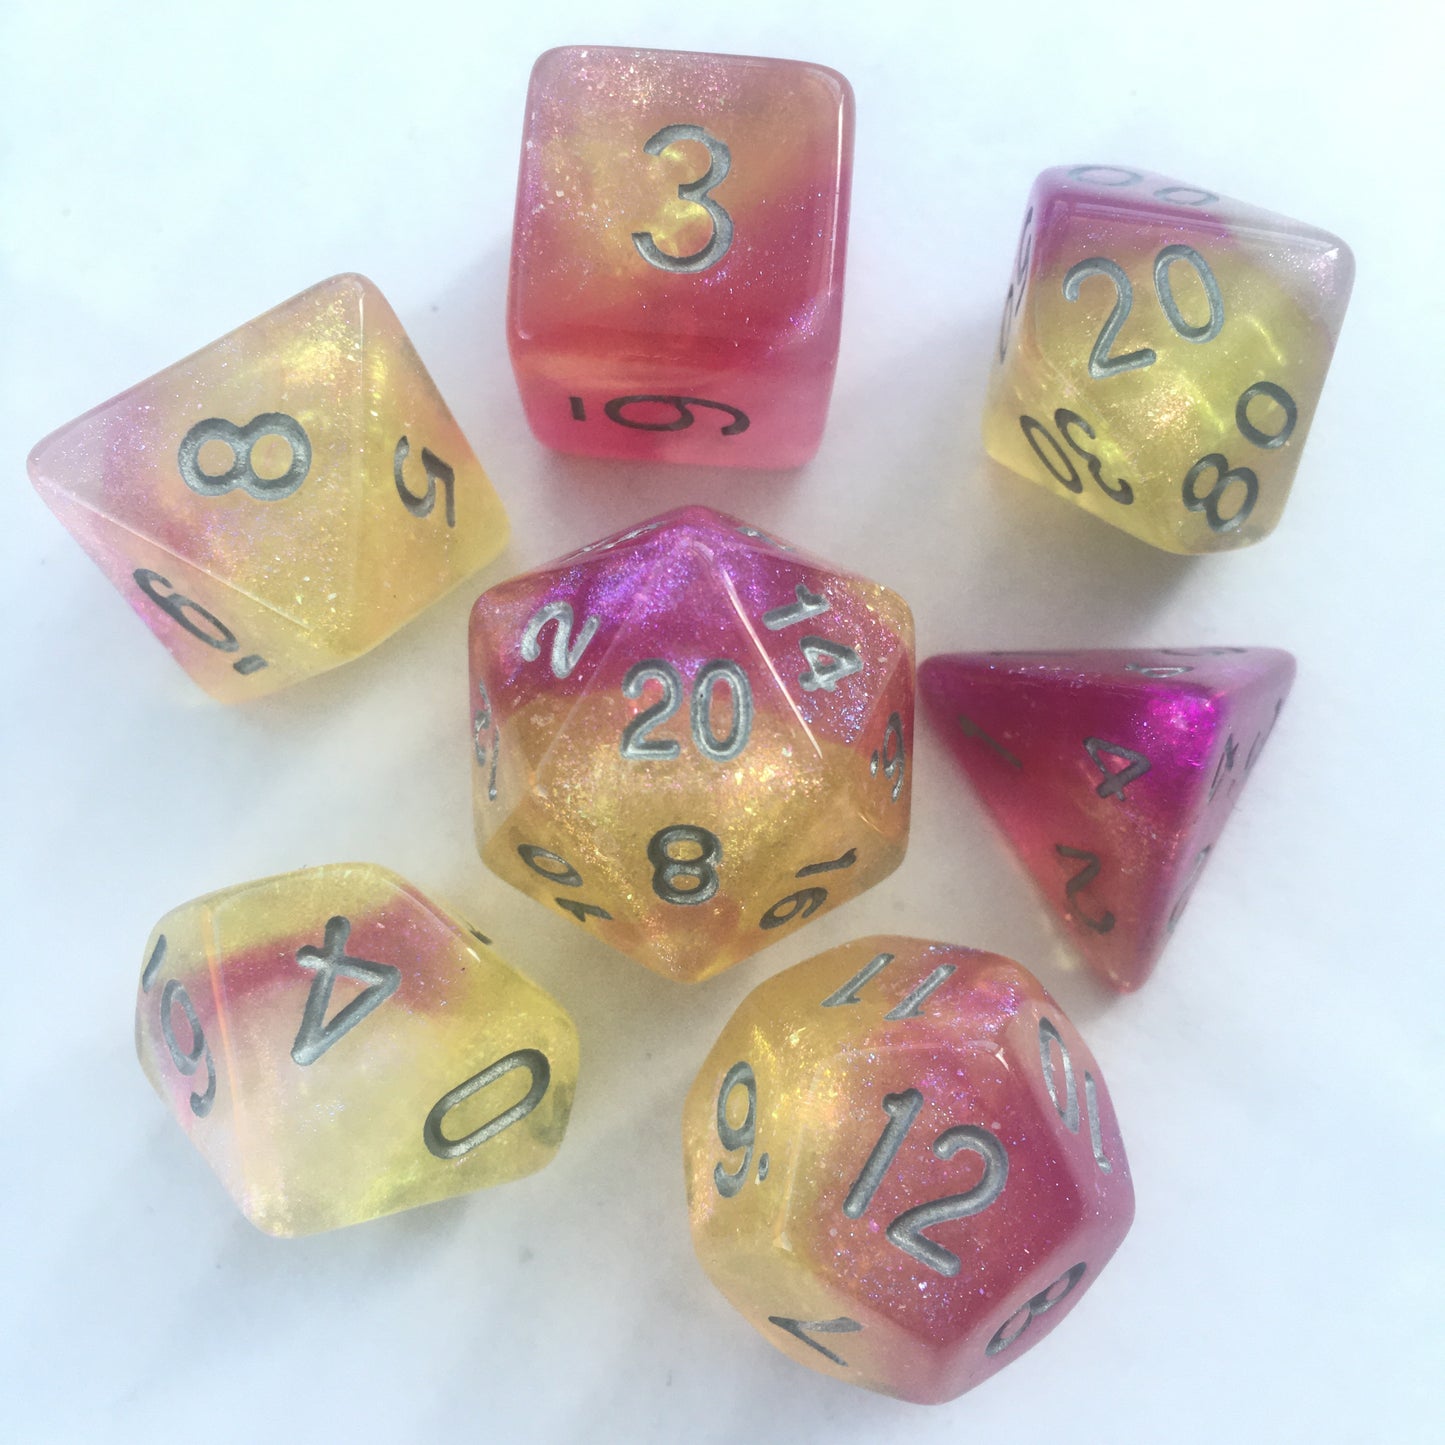 Rhubarb and Custard - Critical Kit dnd TTRPG dice set for role playing games and dice goblin collectors